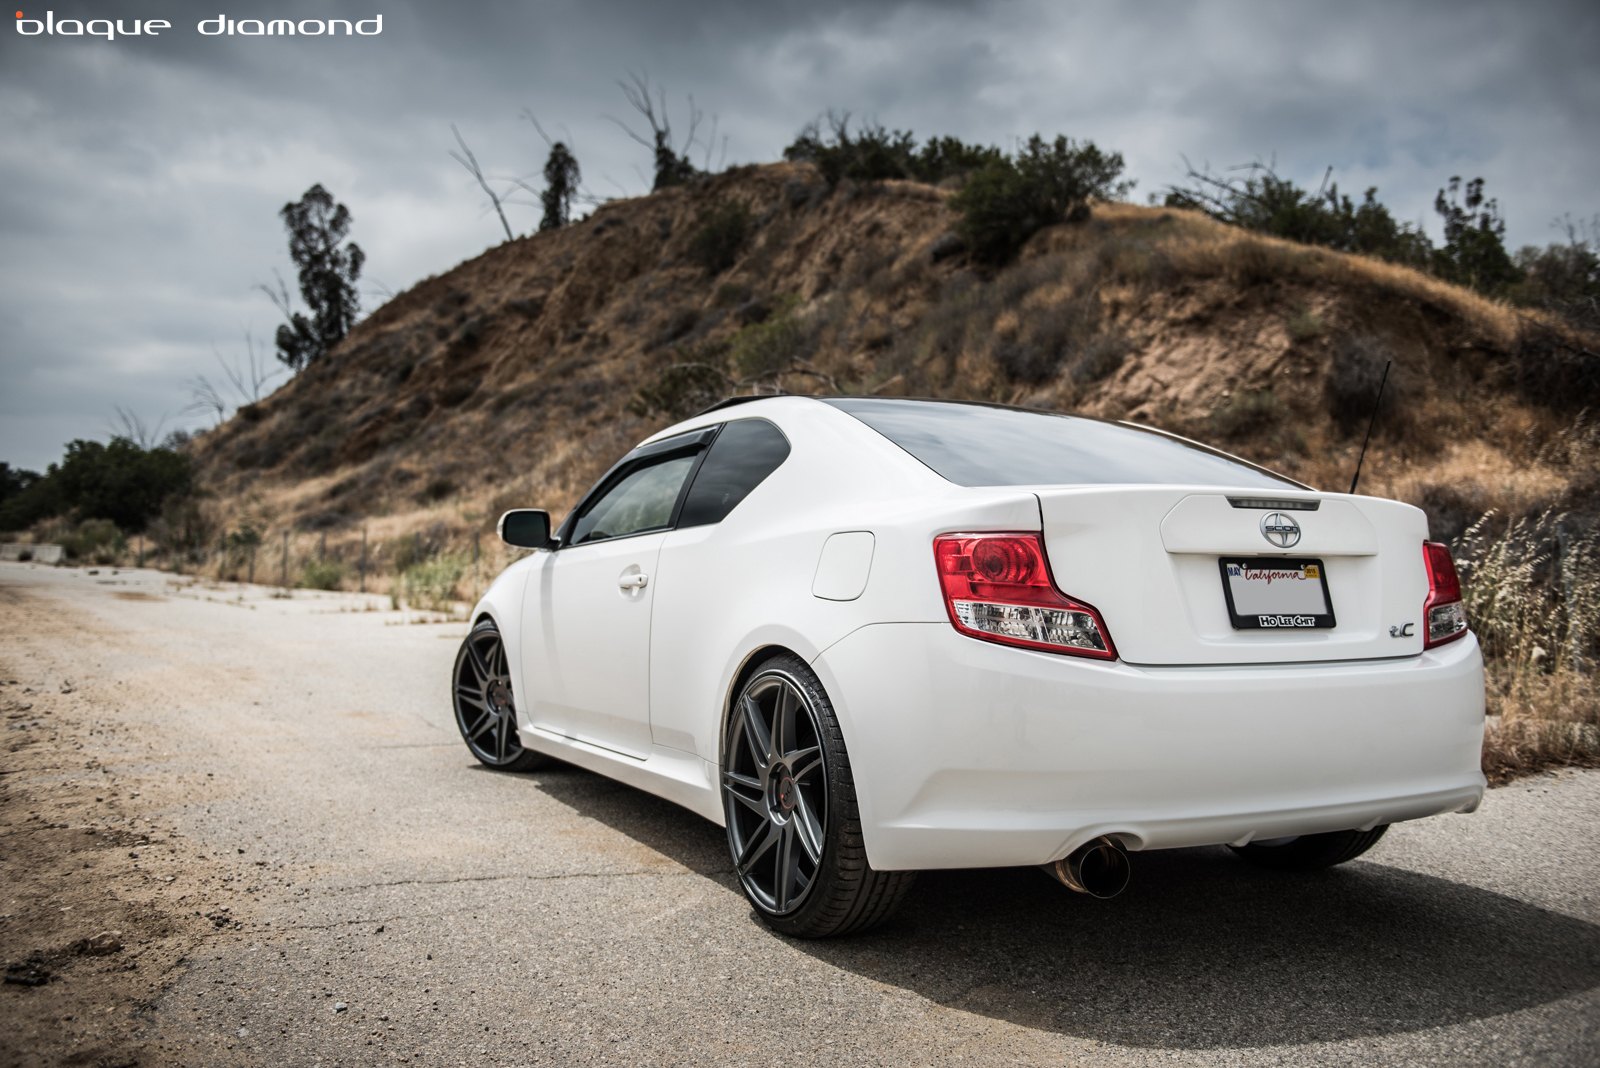 Red LED Taillights on White Scion tC - Photo by Blaque Diamond